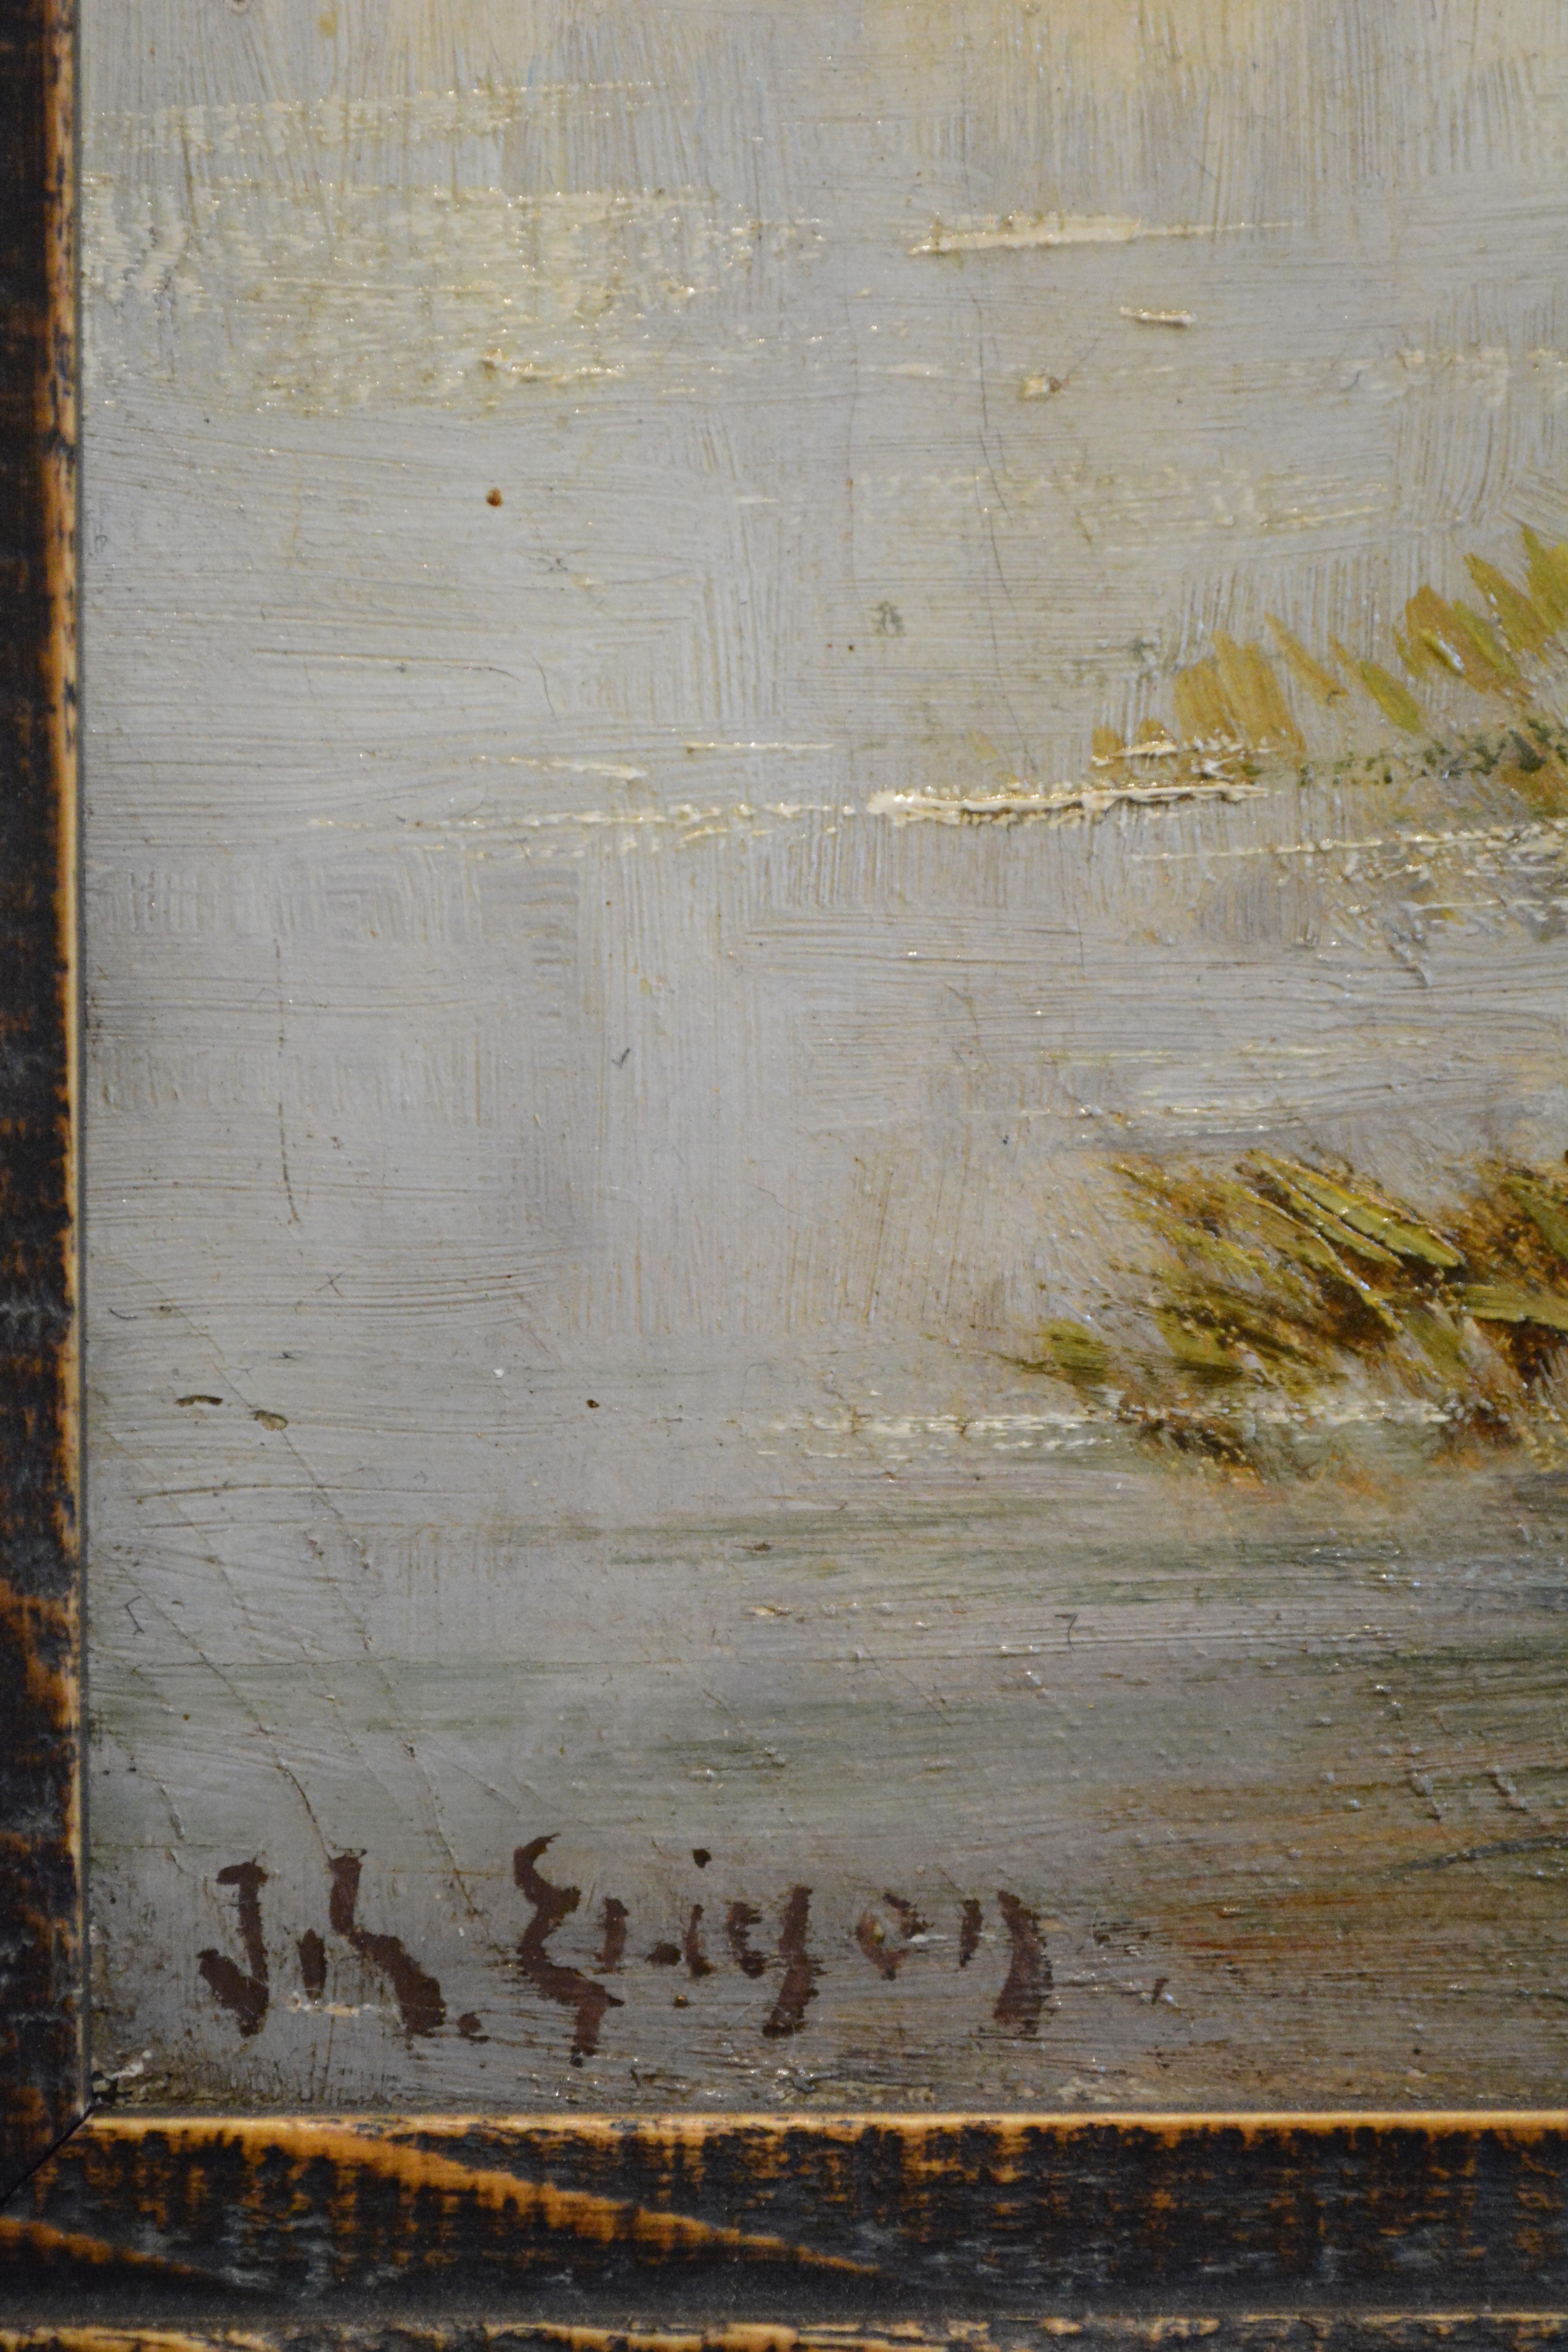 If anyone would like to do the research on the painter “J. Ericson” who signed this wonderful late 19th-century painting of cows grazing in a swamp, you might find they were really notable – because the skill level is so high. There’s a unique style